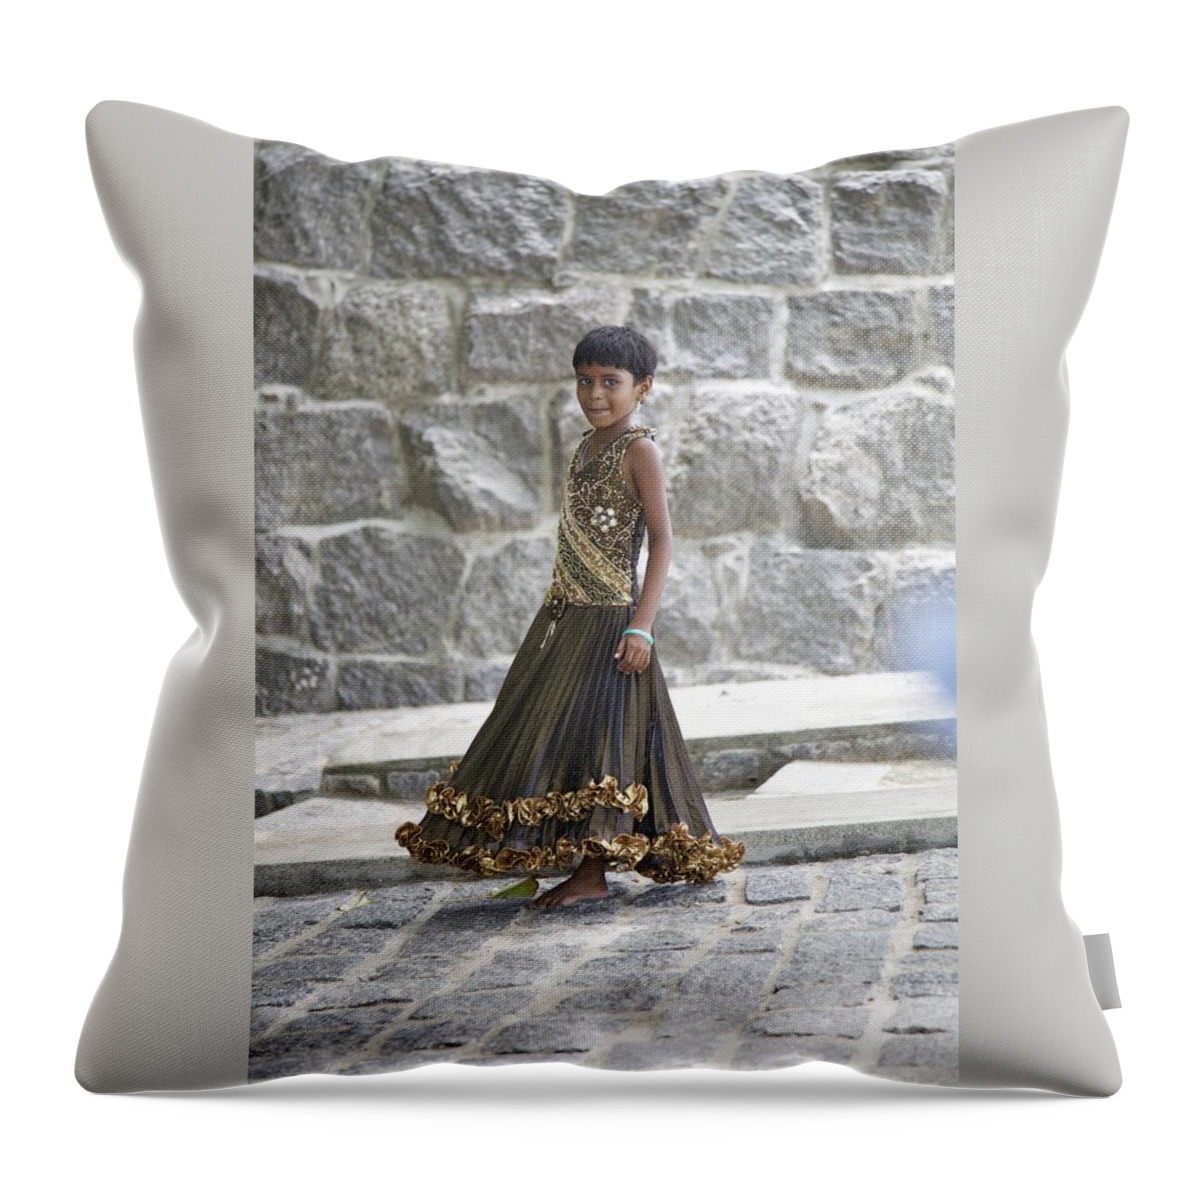 Festival Clothing Throw Pillow featuring the photograph Caught In The Act by Lee Stickels